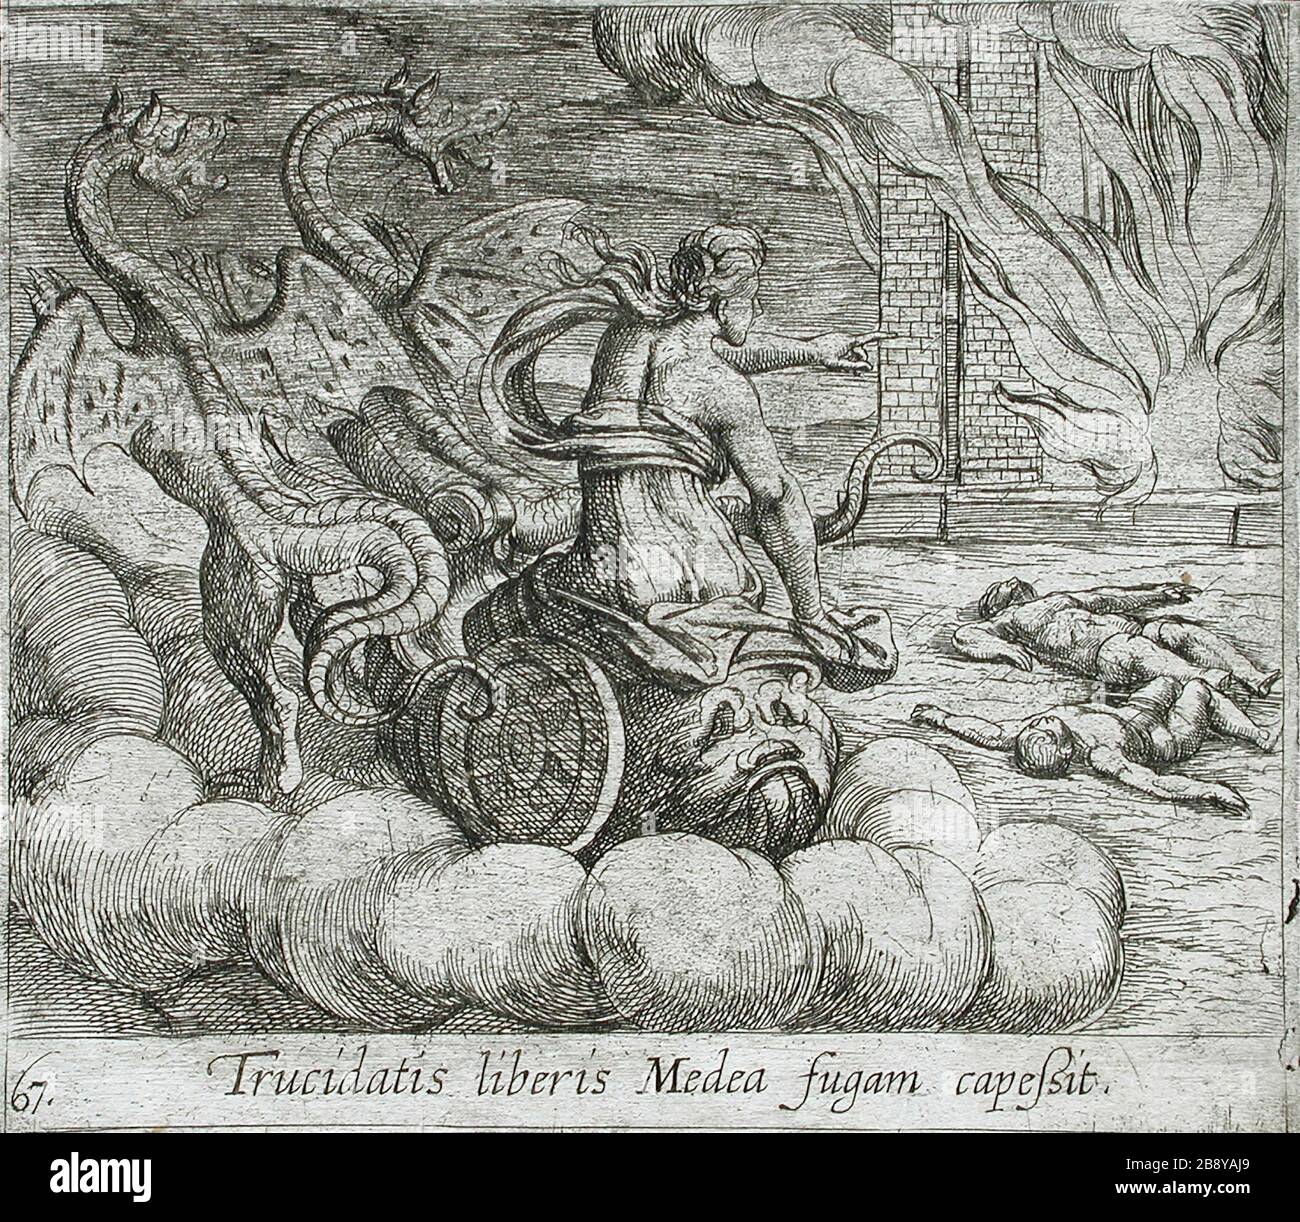 'Medea Destroying Jason's Family and Home; English:  Italy, published 1606 Alternate Title: Trucidatis liberis Medea fugam capessit Series: The Metamorphoses of Ovid, pl. 67 Edition: Second edition Prints; etchings Etching Los Angeles County Fund (65.37.150) Prints and Drawings; Published 1606; ' Stock Photo